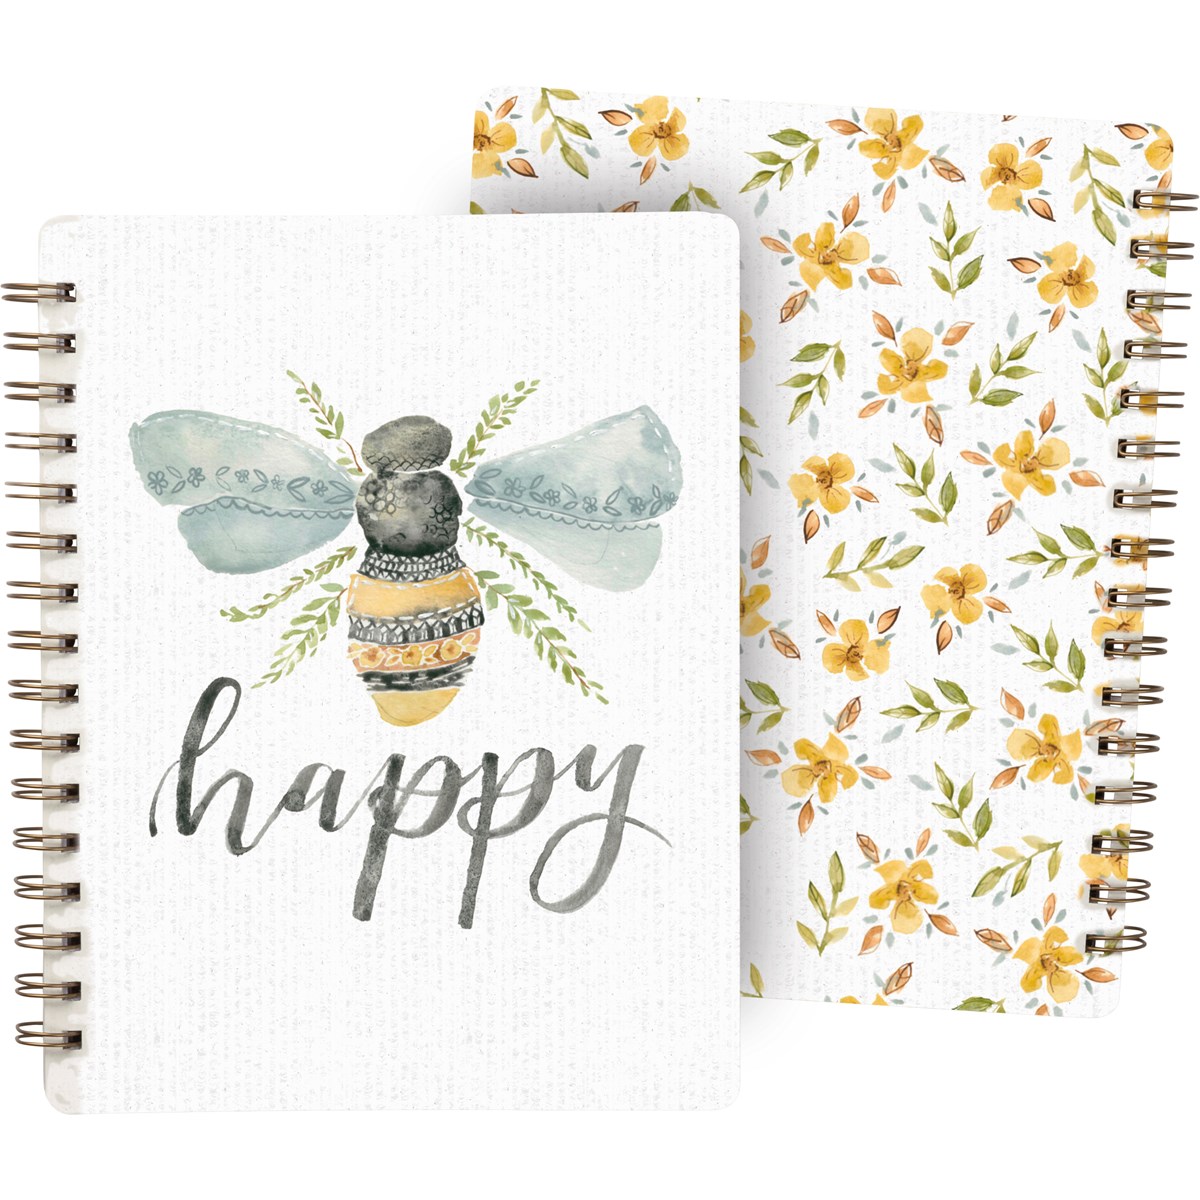 Spiral Notebook - Be Happy - 5.75" x 7.50" x 0.50" - Paper, Metal